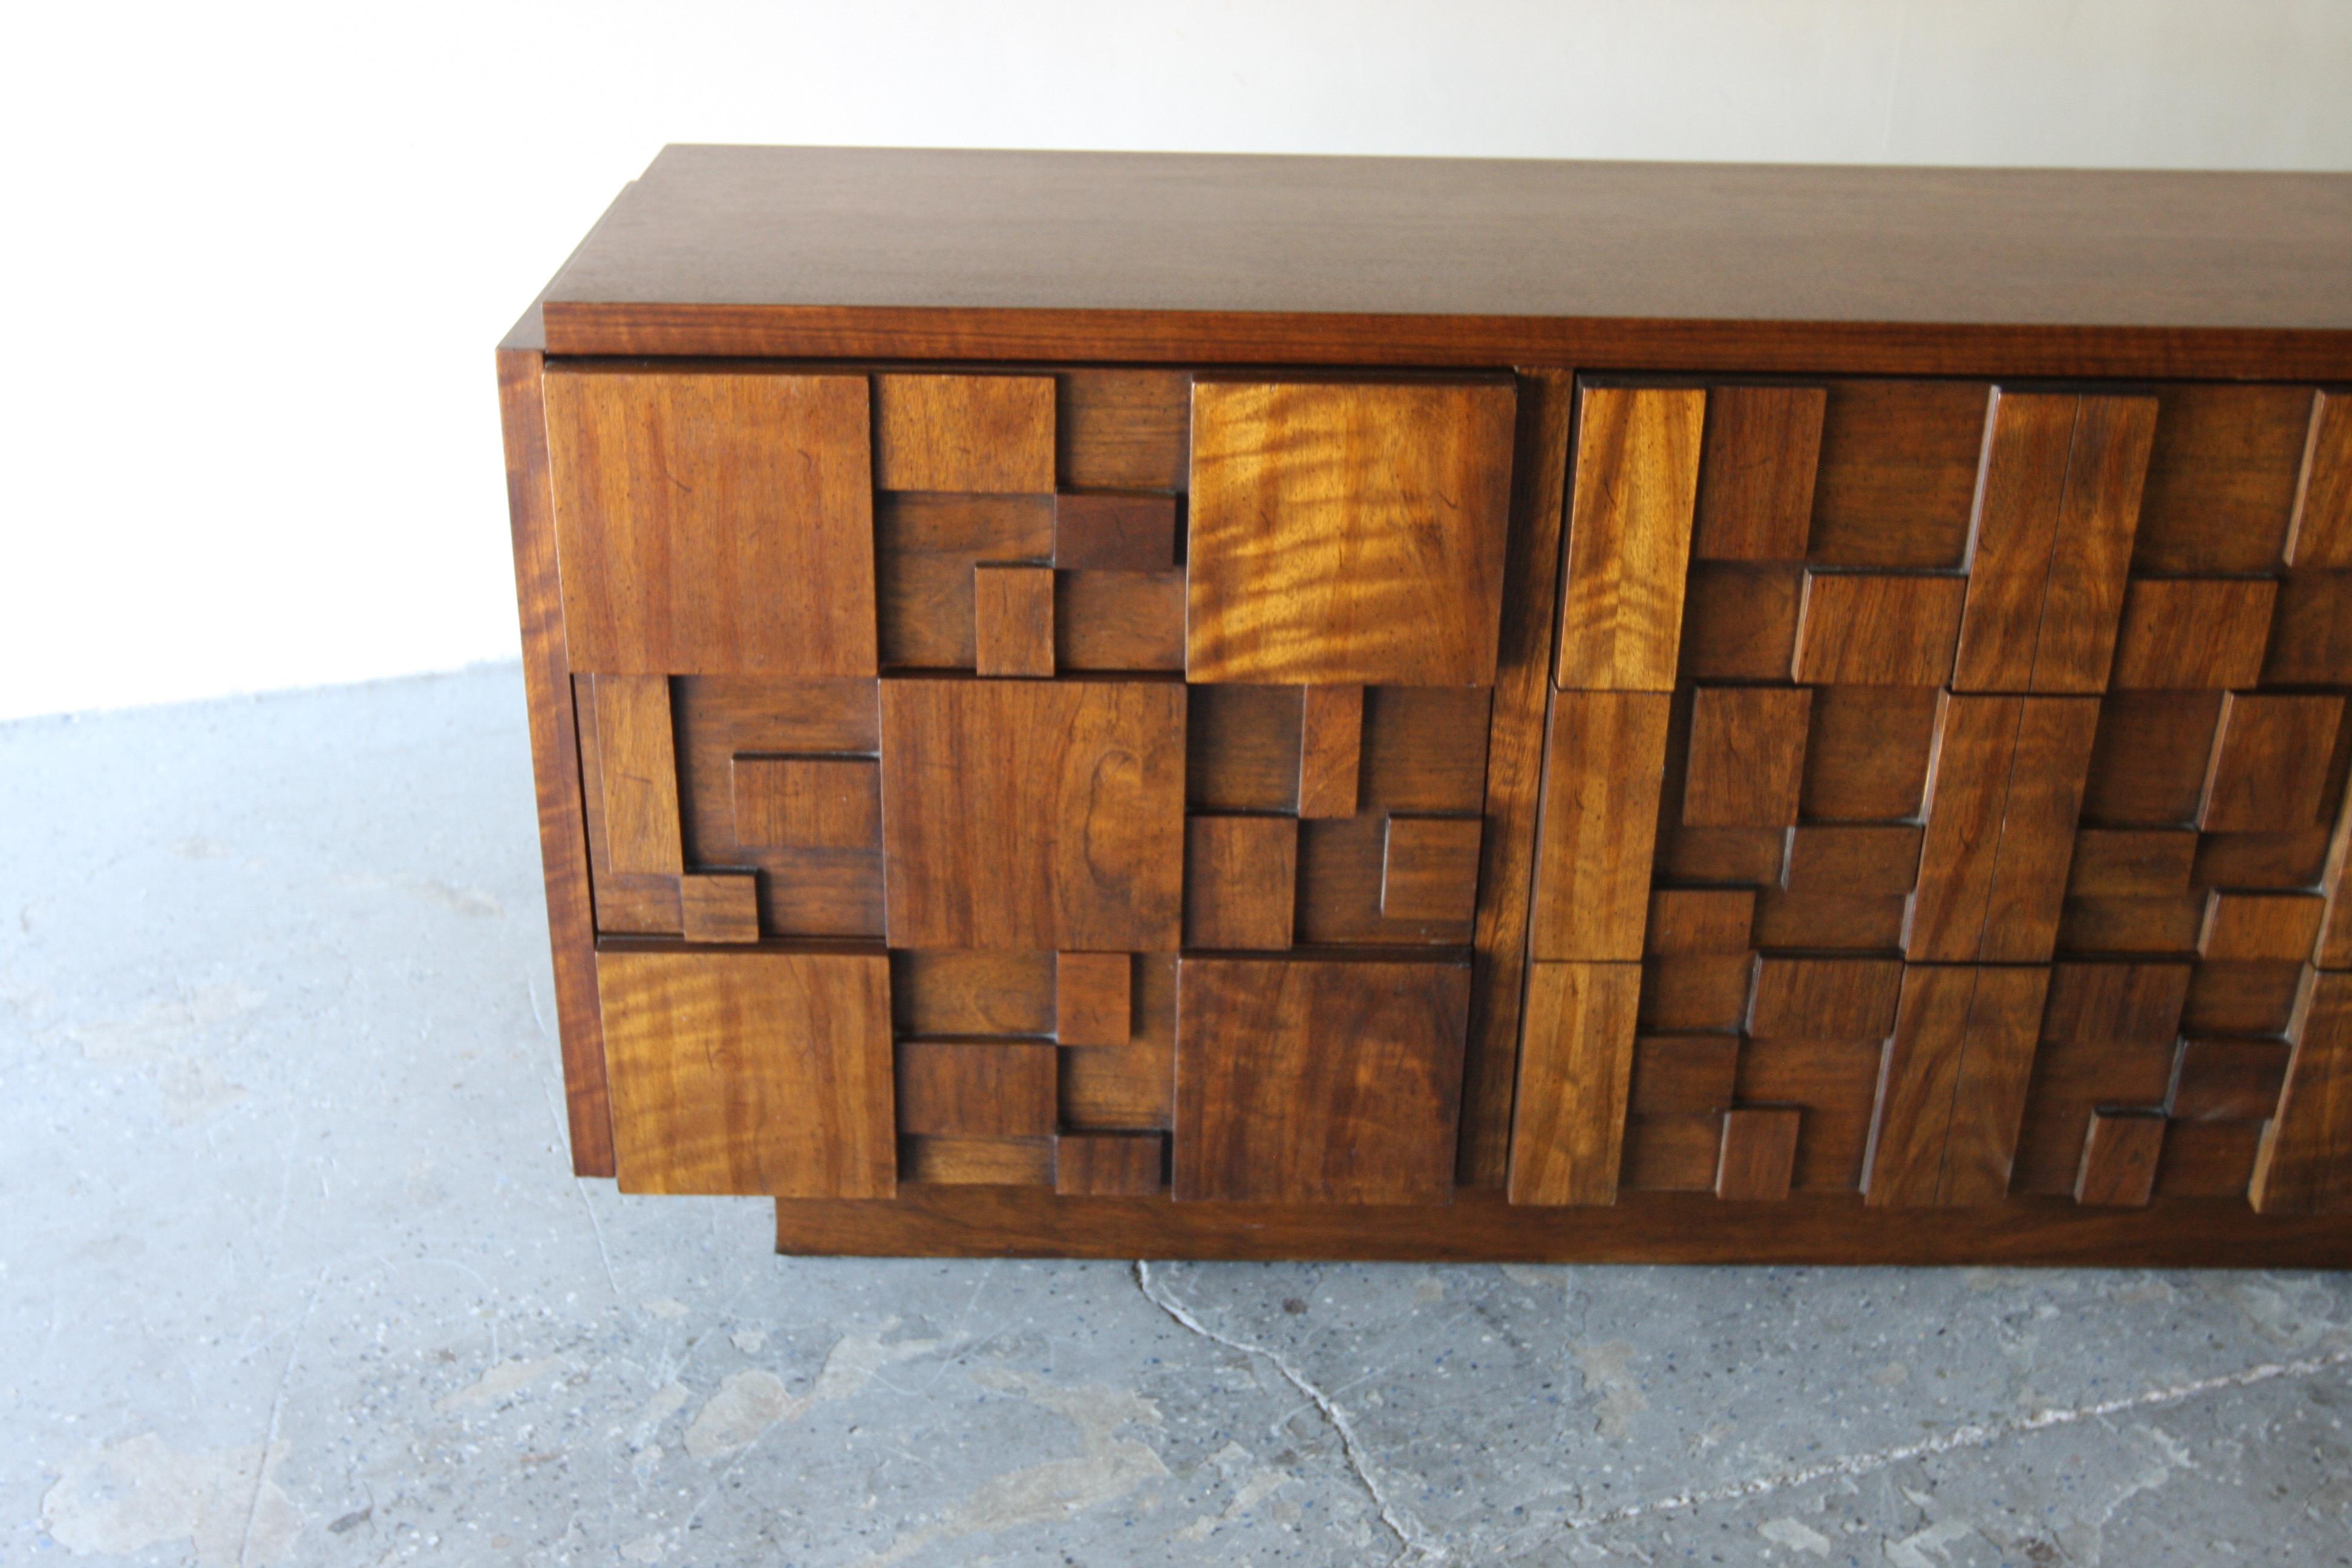 1970s Lane Staccato Mid Century Modern Mosaic Brutalist Lowboy Dresser
Lane Staccato Mosaic Brutalist Dresser / credenza. This beautiful piece has 9 drawers. This is a true statement piece.

31